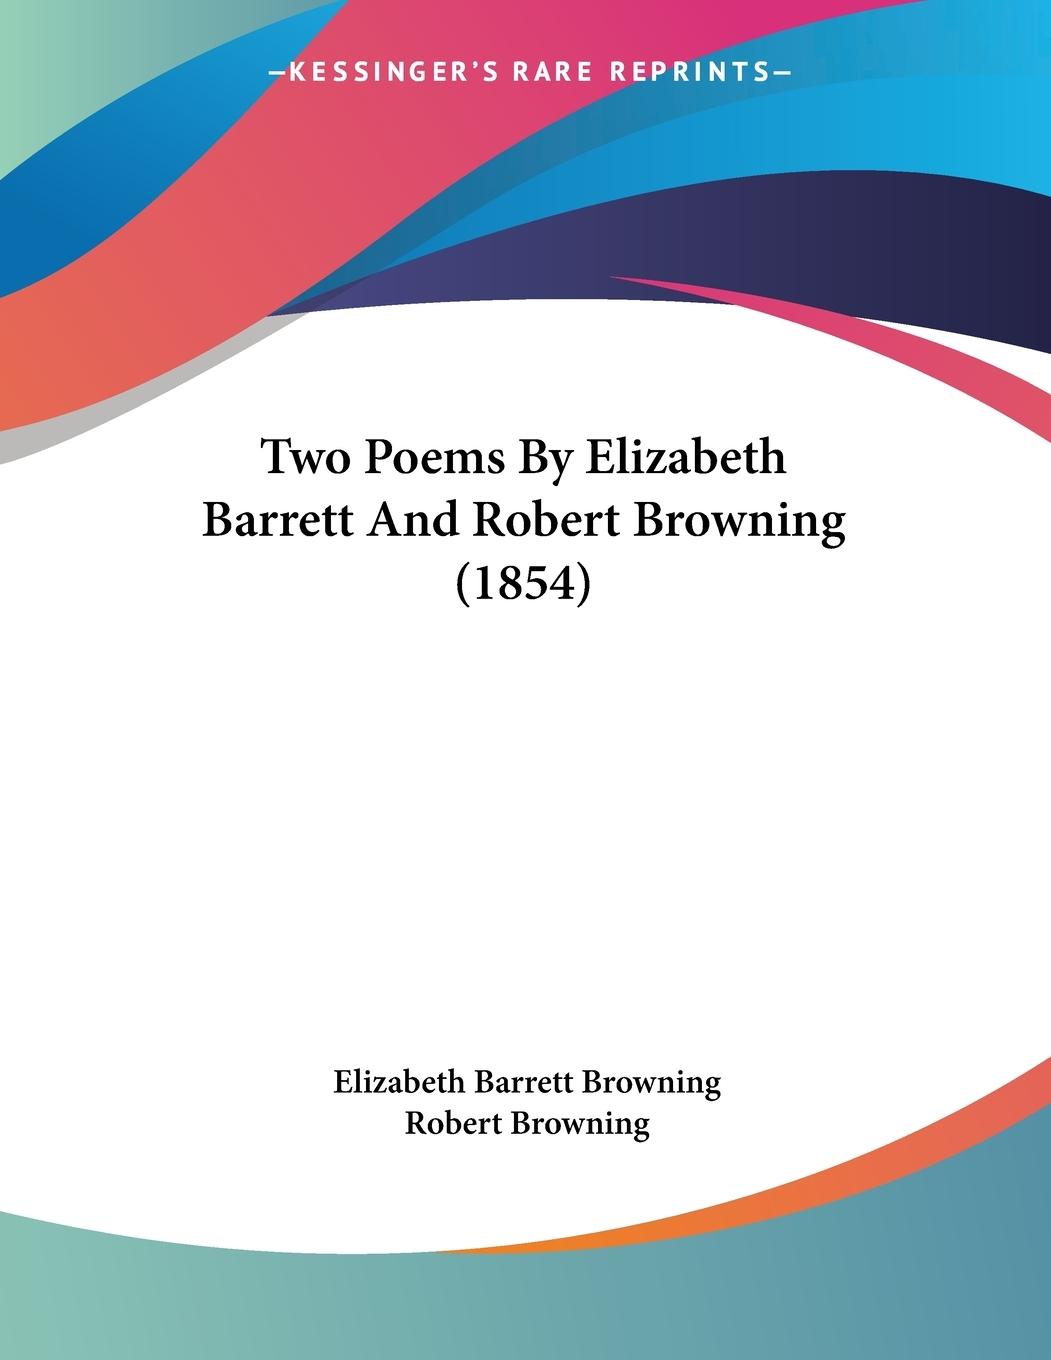 Browning, E: Two Poems By Elizabeth Barrett And Robert Brown - Browning, Elizabeth Barrett Browning, Robert